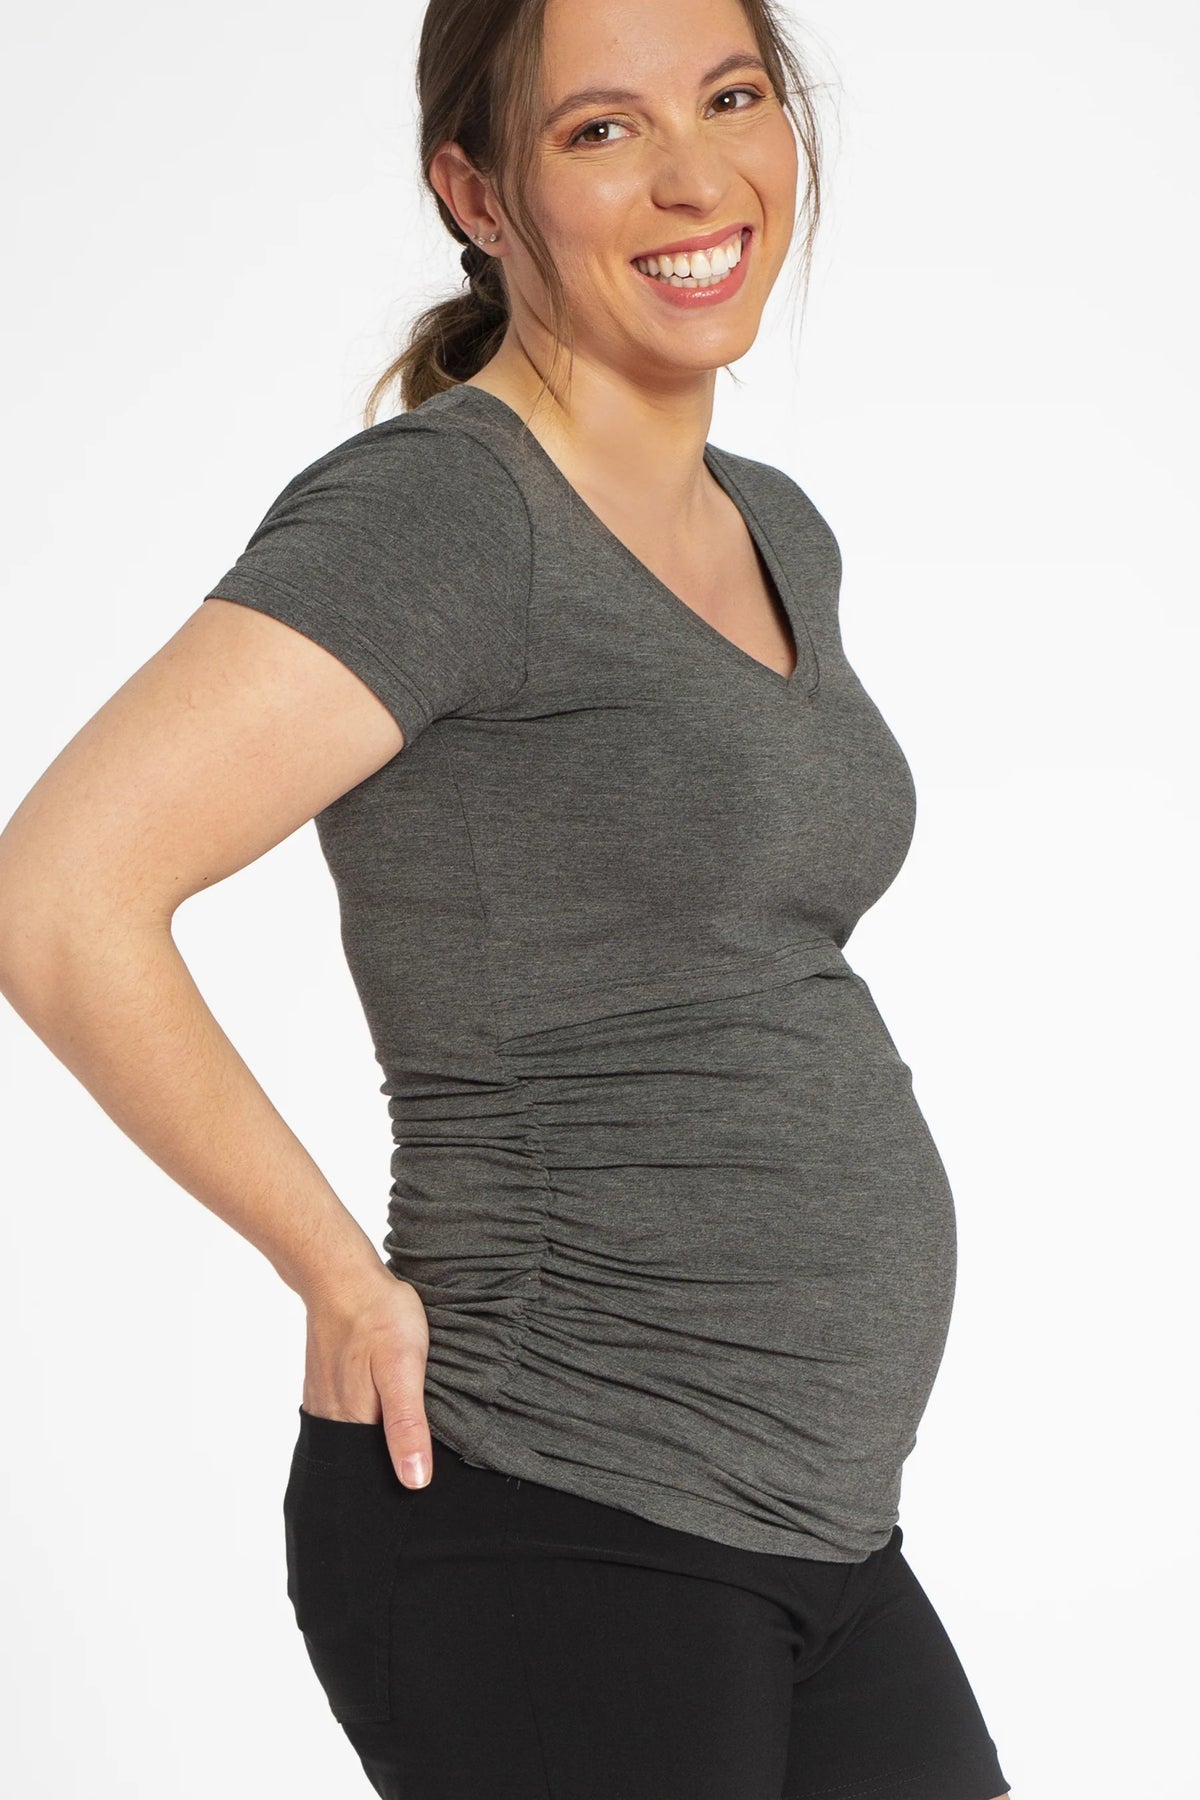  Connche Quinee Tunic Shirt, Womens Maternity